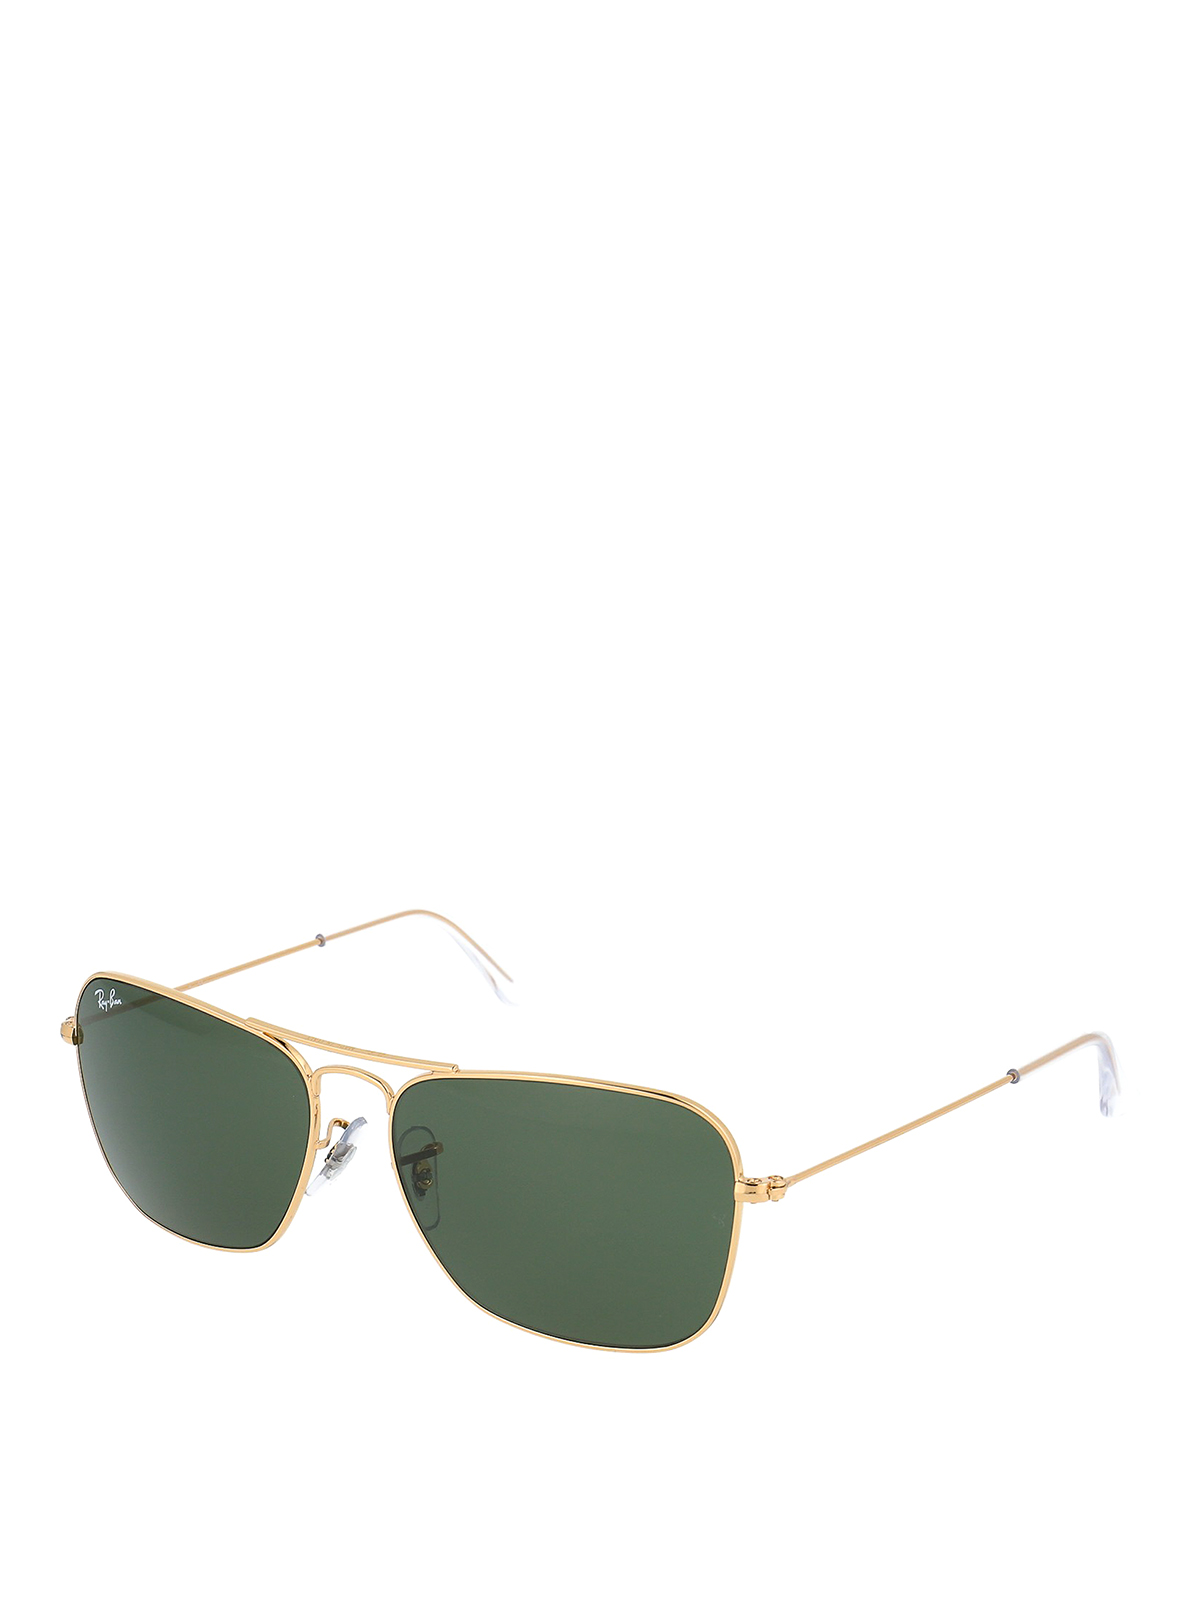 Ray Ban - Golden frame squared 